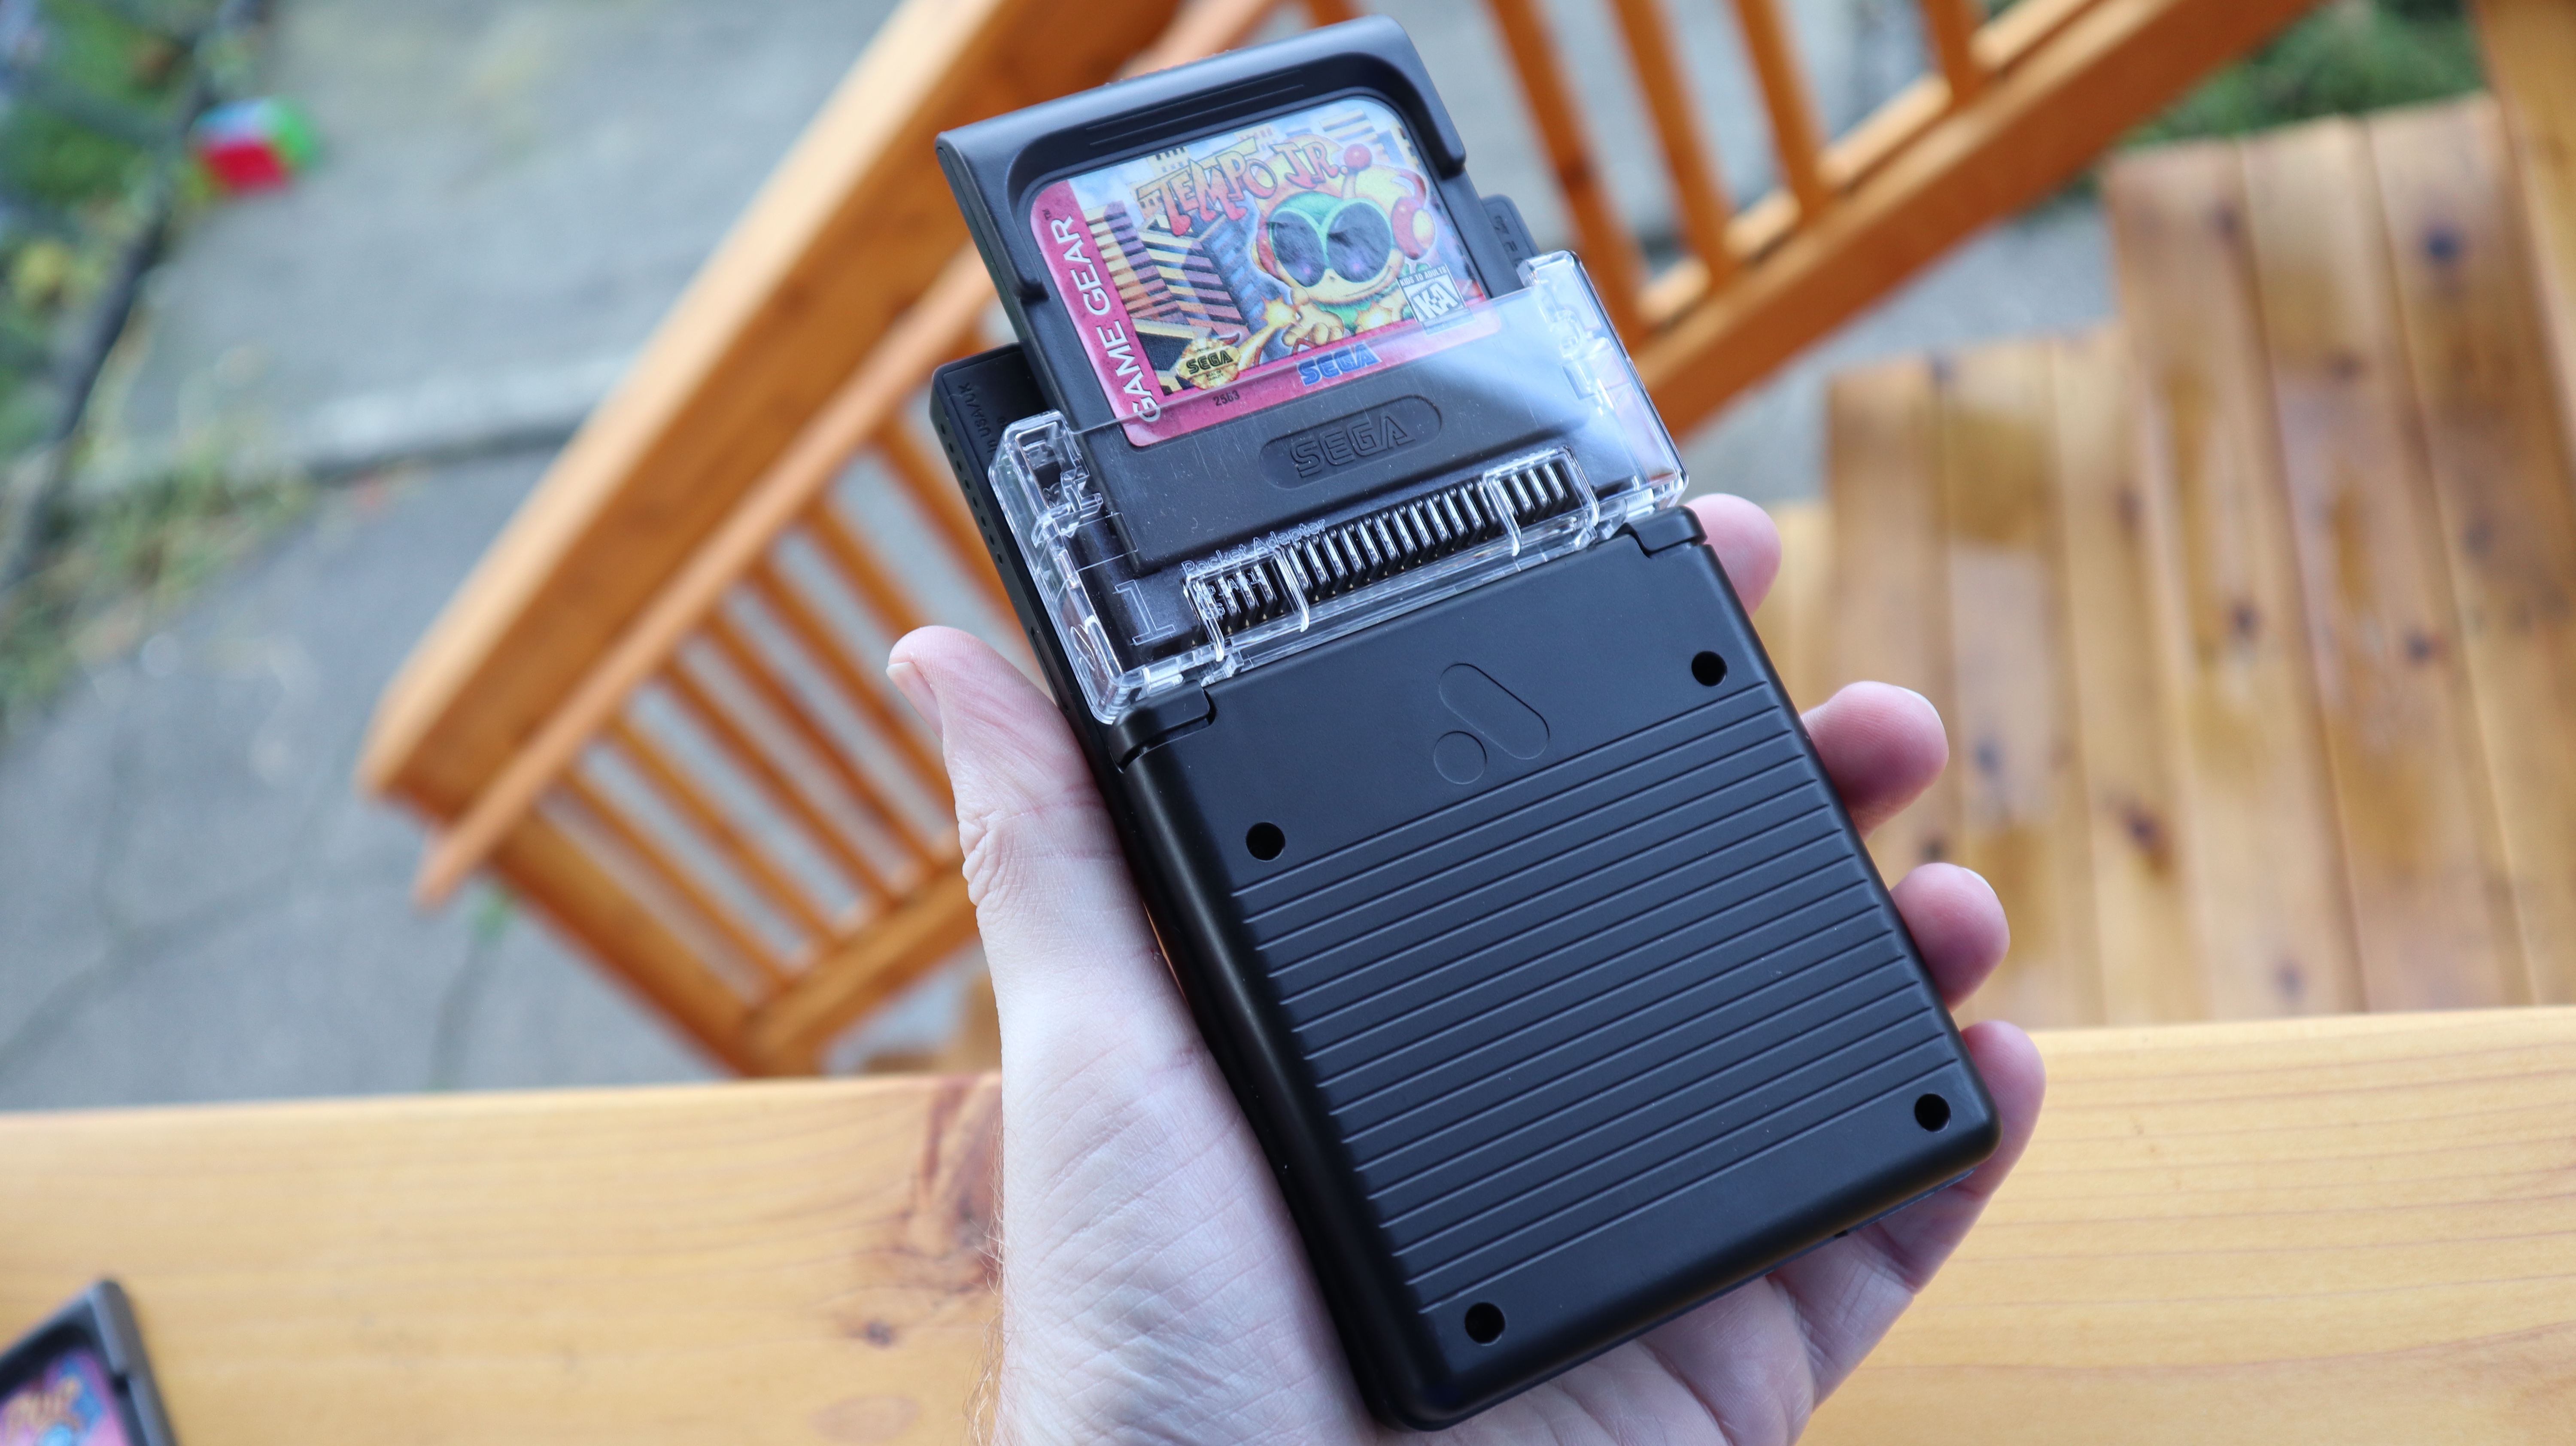 Game Gear Sonic 1 and 2 cartridge confusion